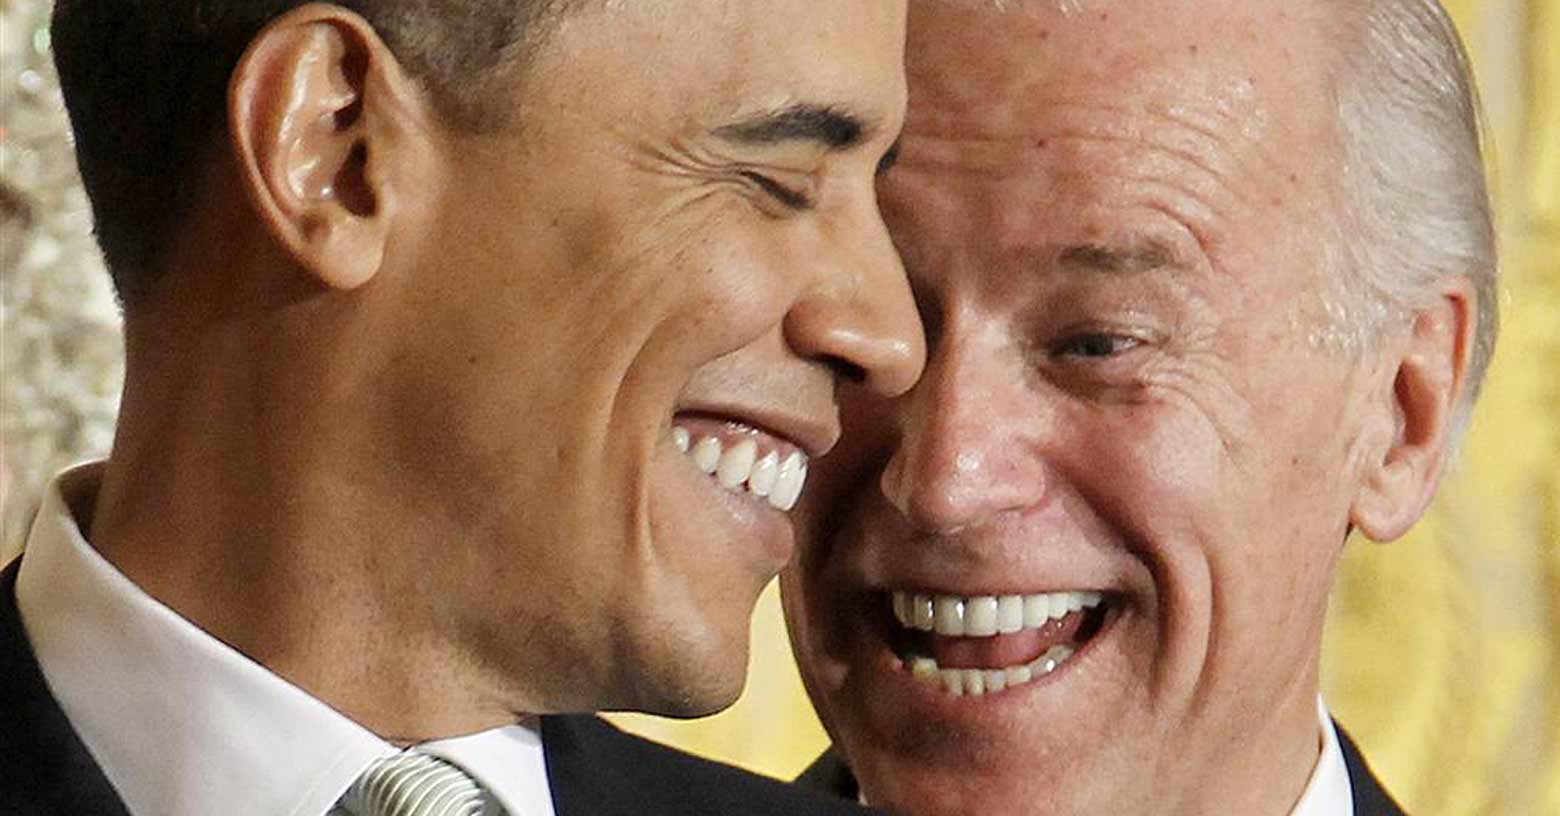 Biden tells Obama that health care is a BFD